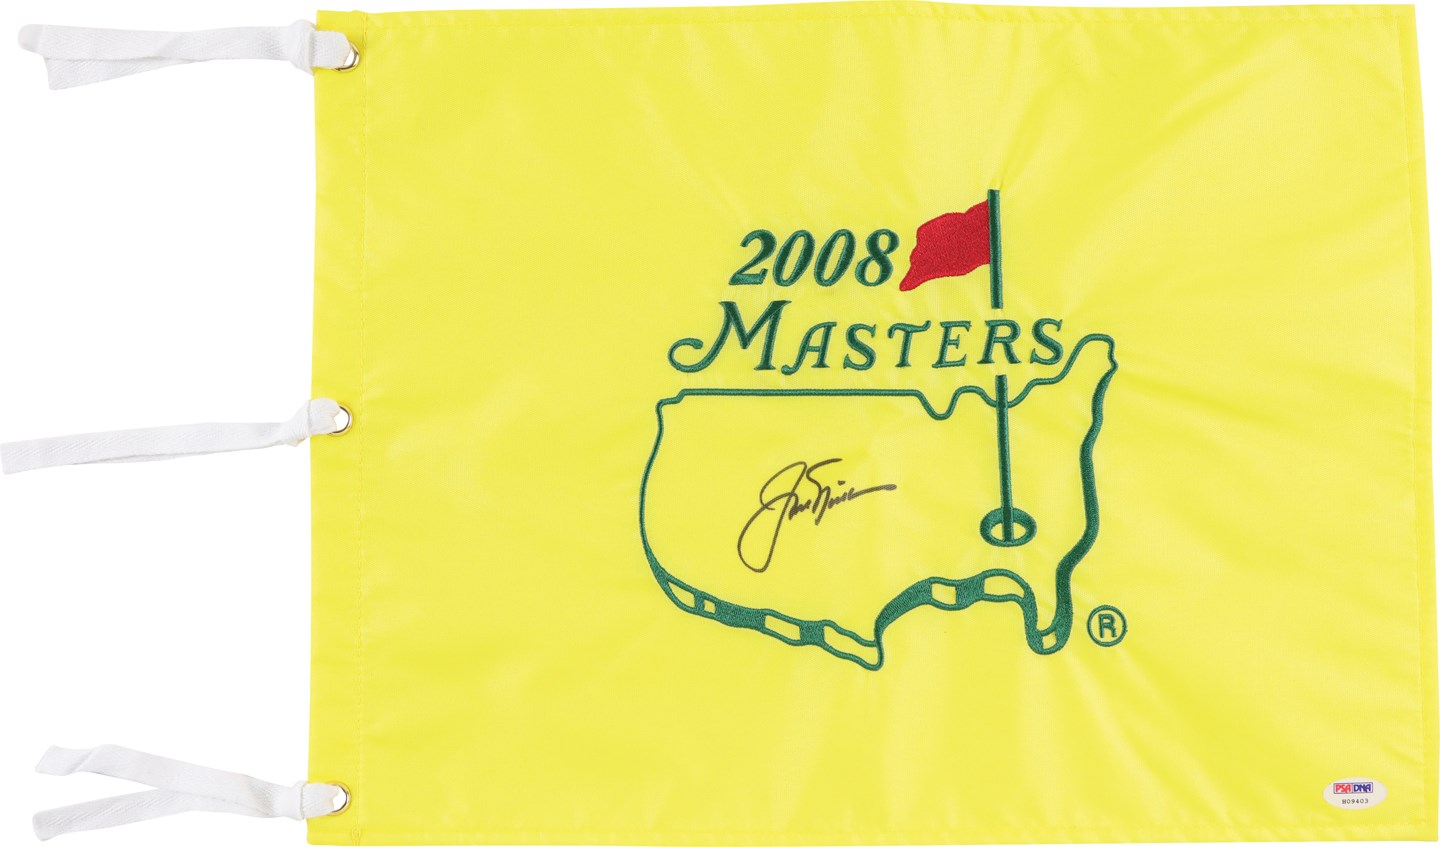 Olympics and All Sports - Jack Nicklaus Signed 2008 Masters Flag (PSA)